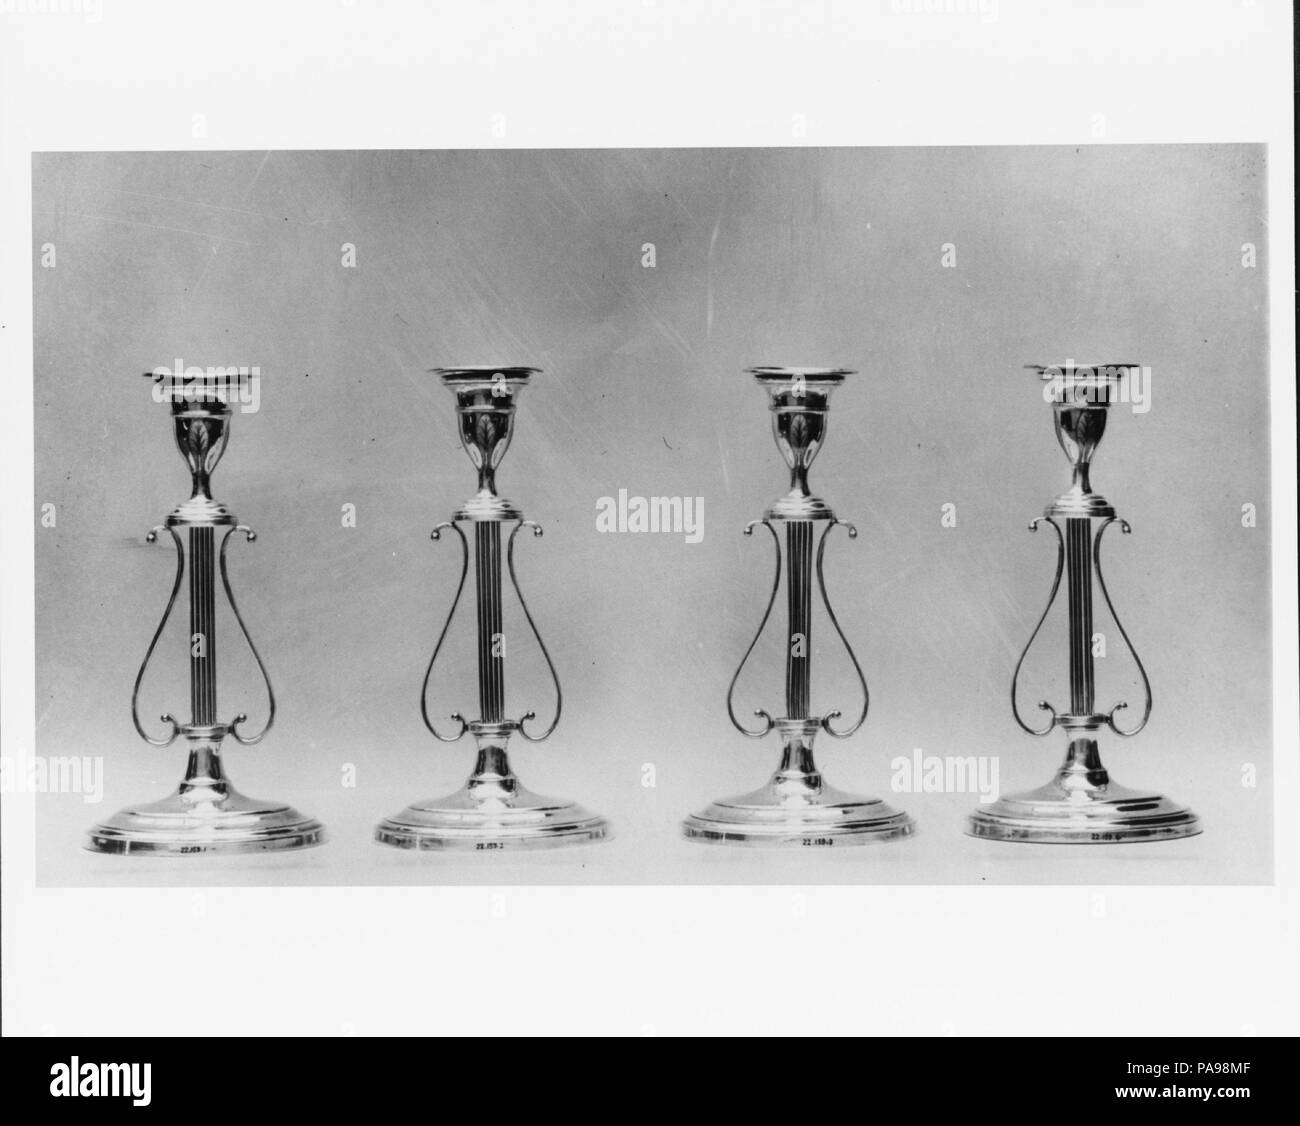 Candlestick. Dimensions: 11 9/16 x 6 3/16 in. (29.4 x 15.7 cm). Date: 1800-1830. Museum: Metropolitan Museum of Art, New York, USA. Stock Photo